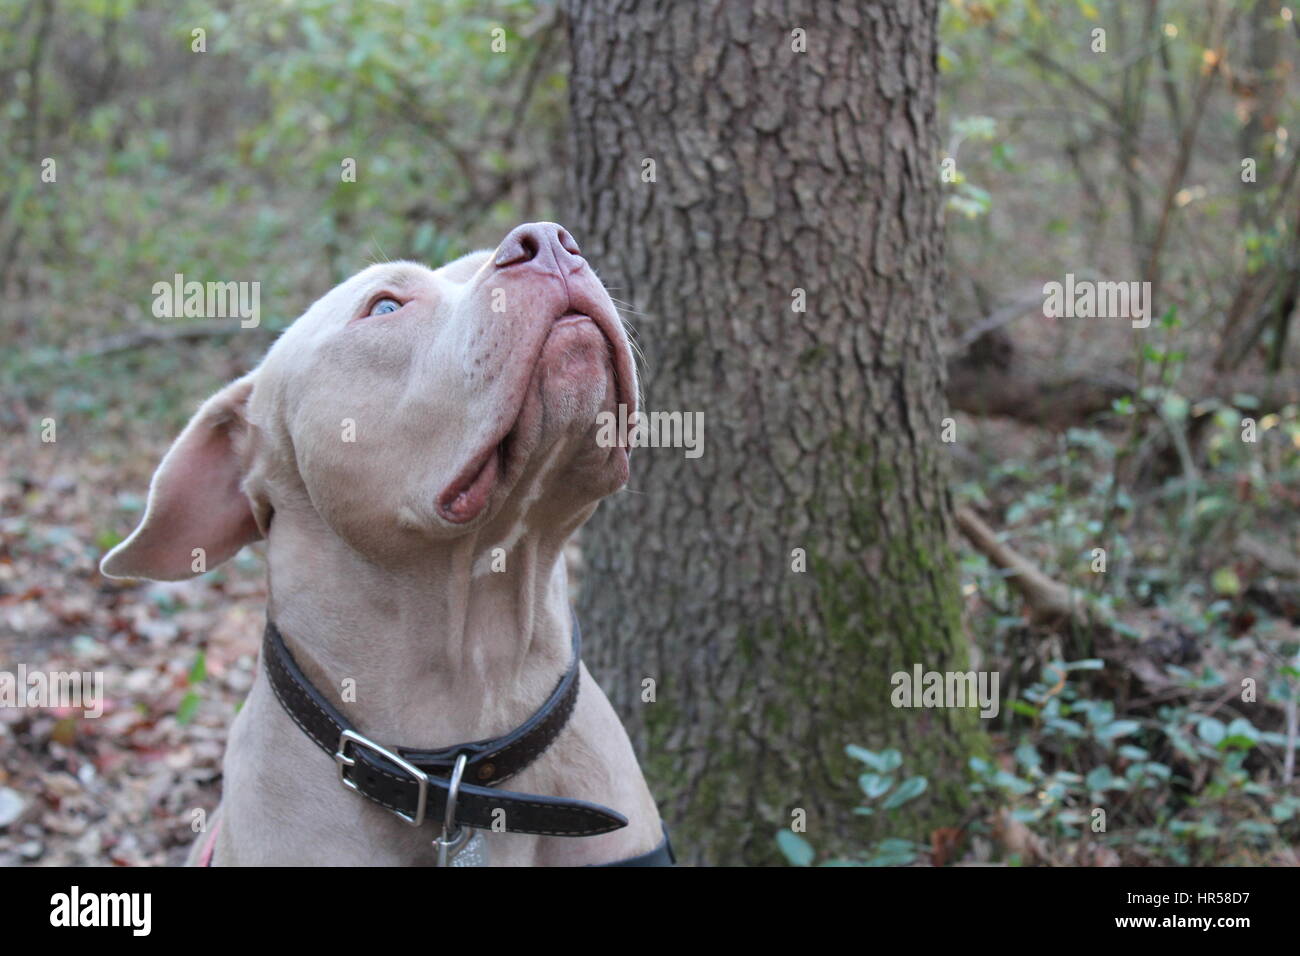 American Staffordshire Terrier. Pitbull Banque D'Images